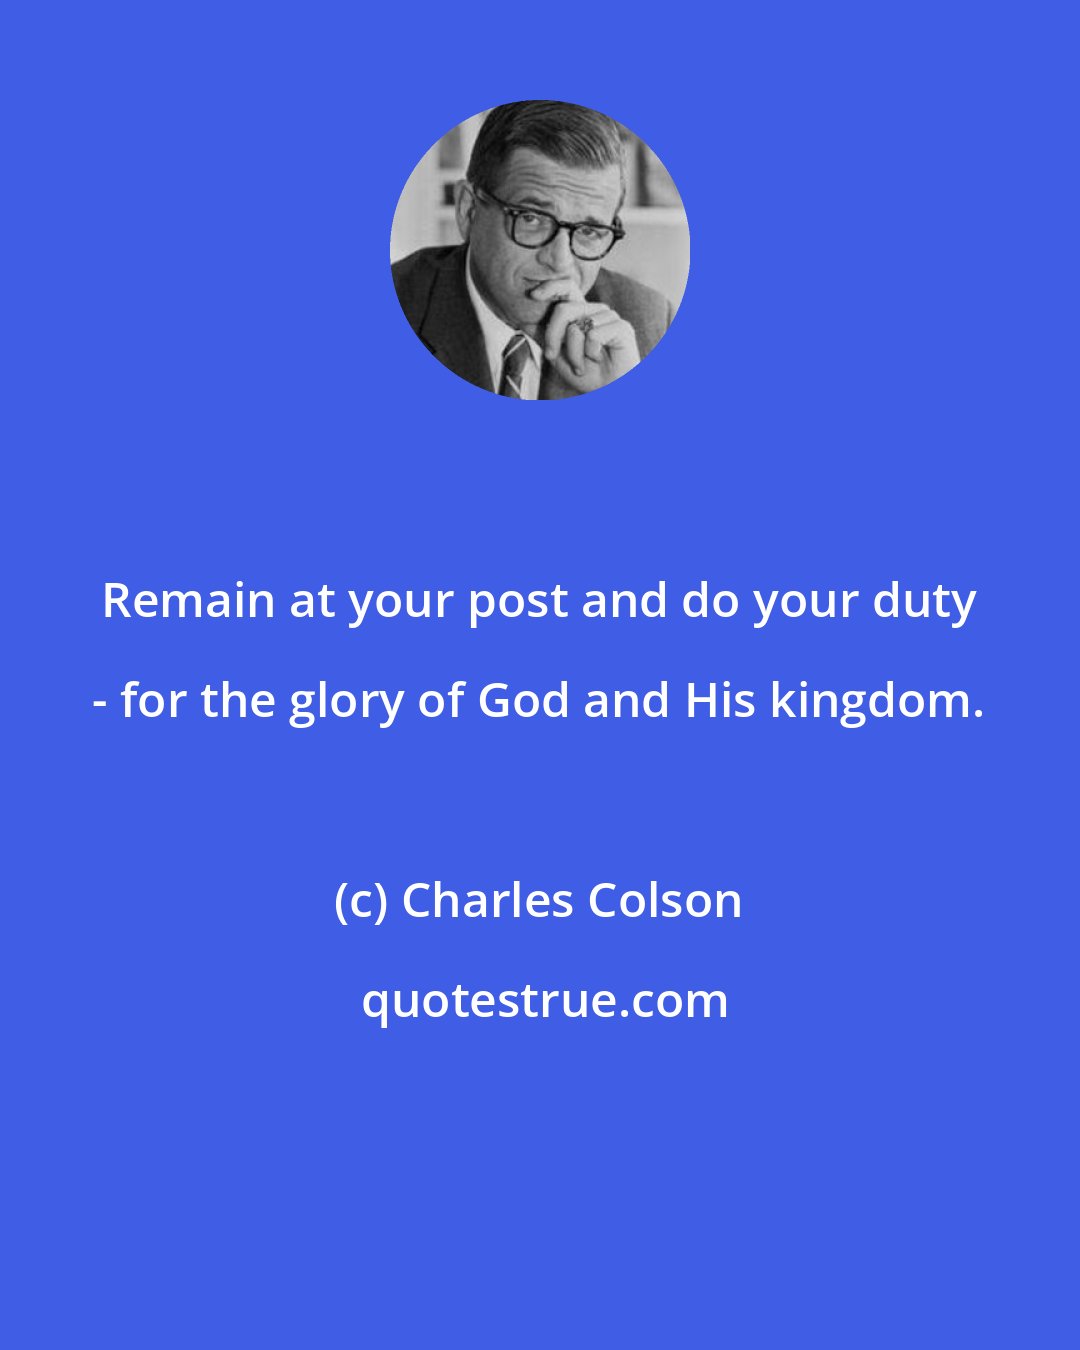 Charles Colson: Remain at your post and do your duty - for the glory of God and His kingdom.